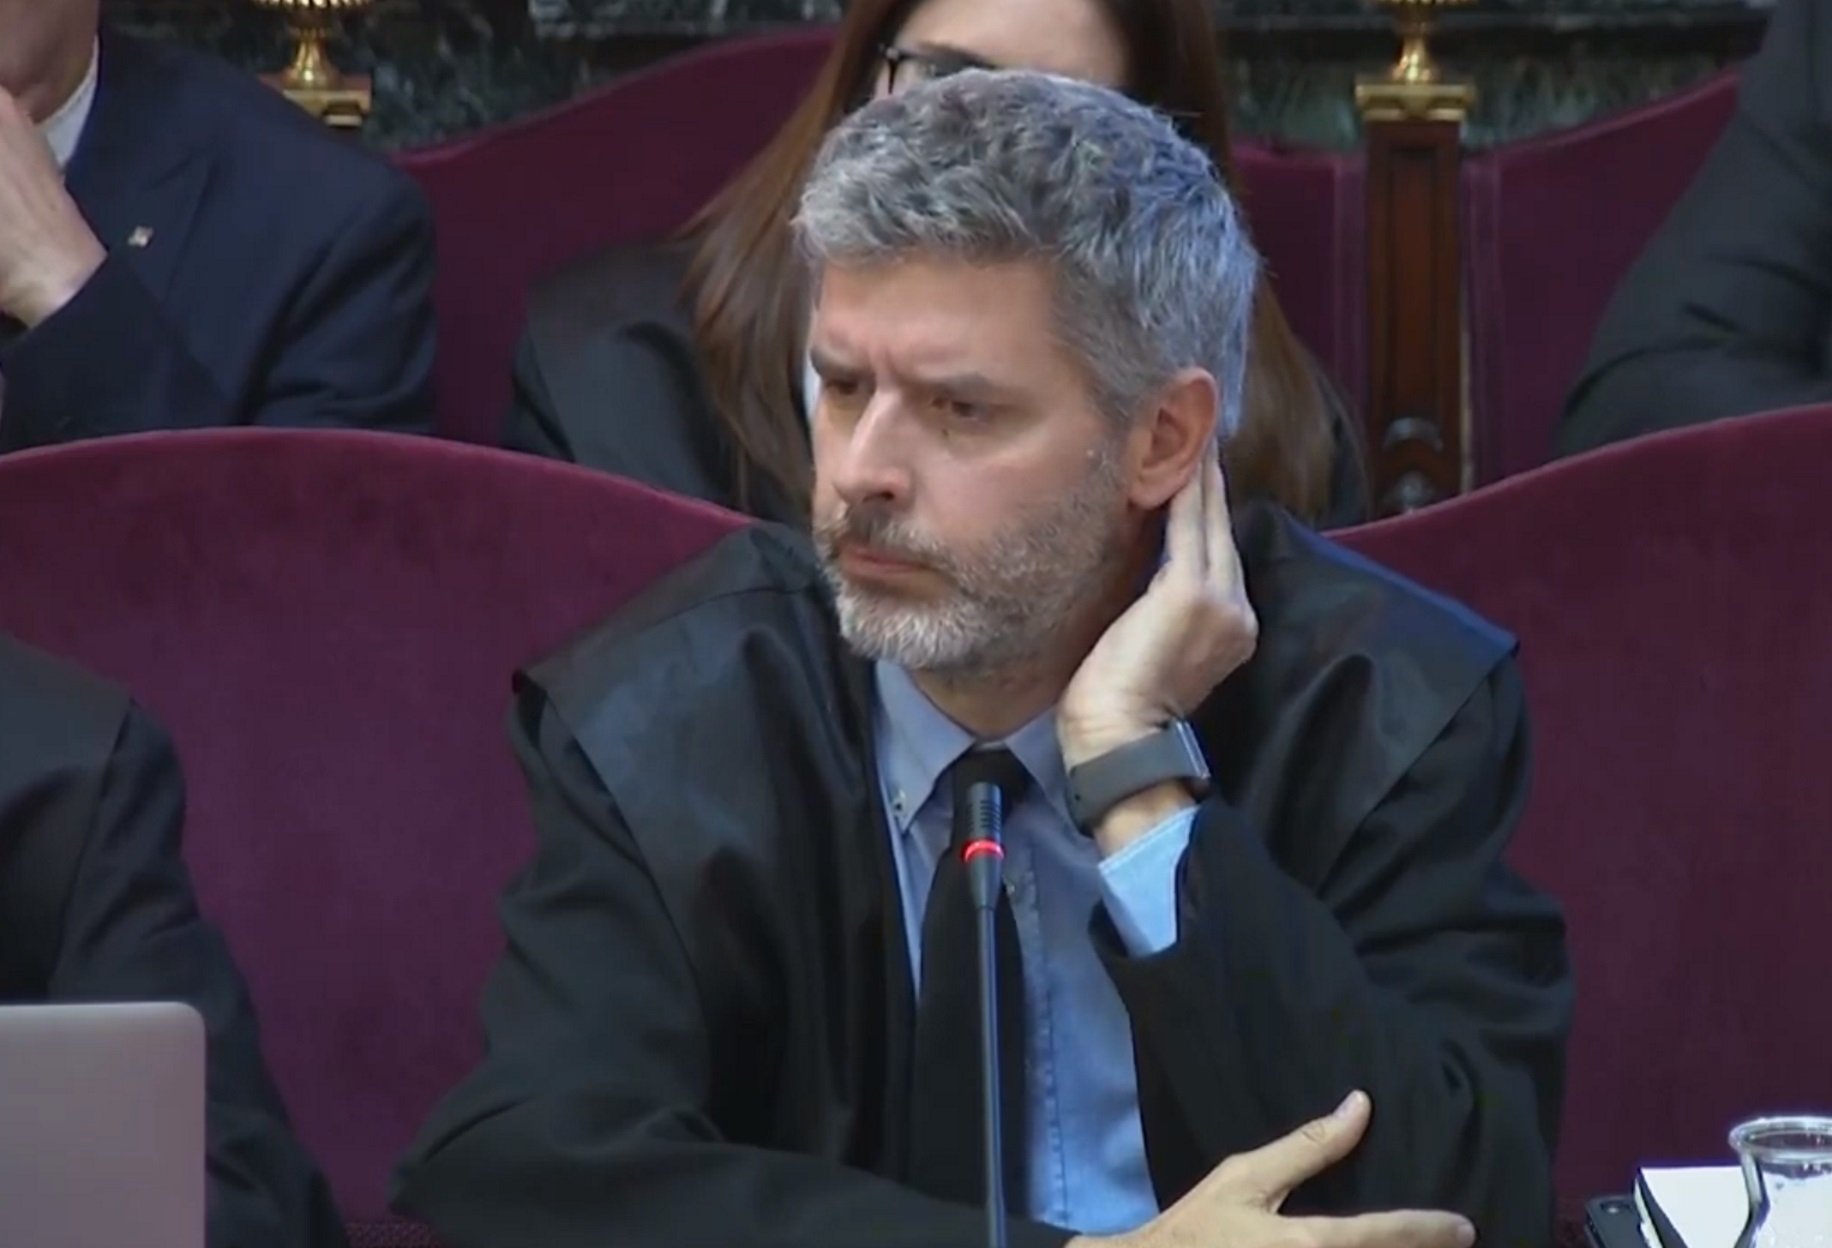 Head of Civil Guard investigation testifies to Catalan independence trial